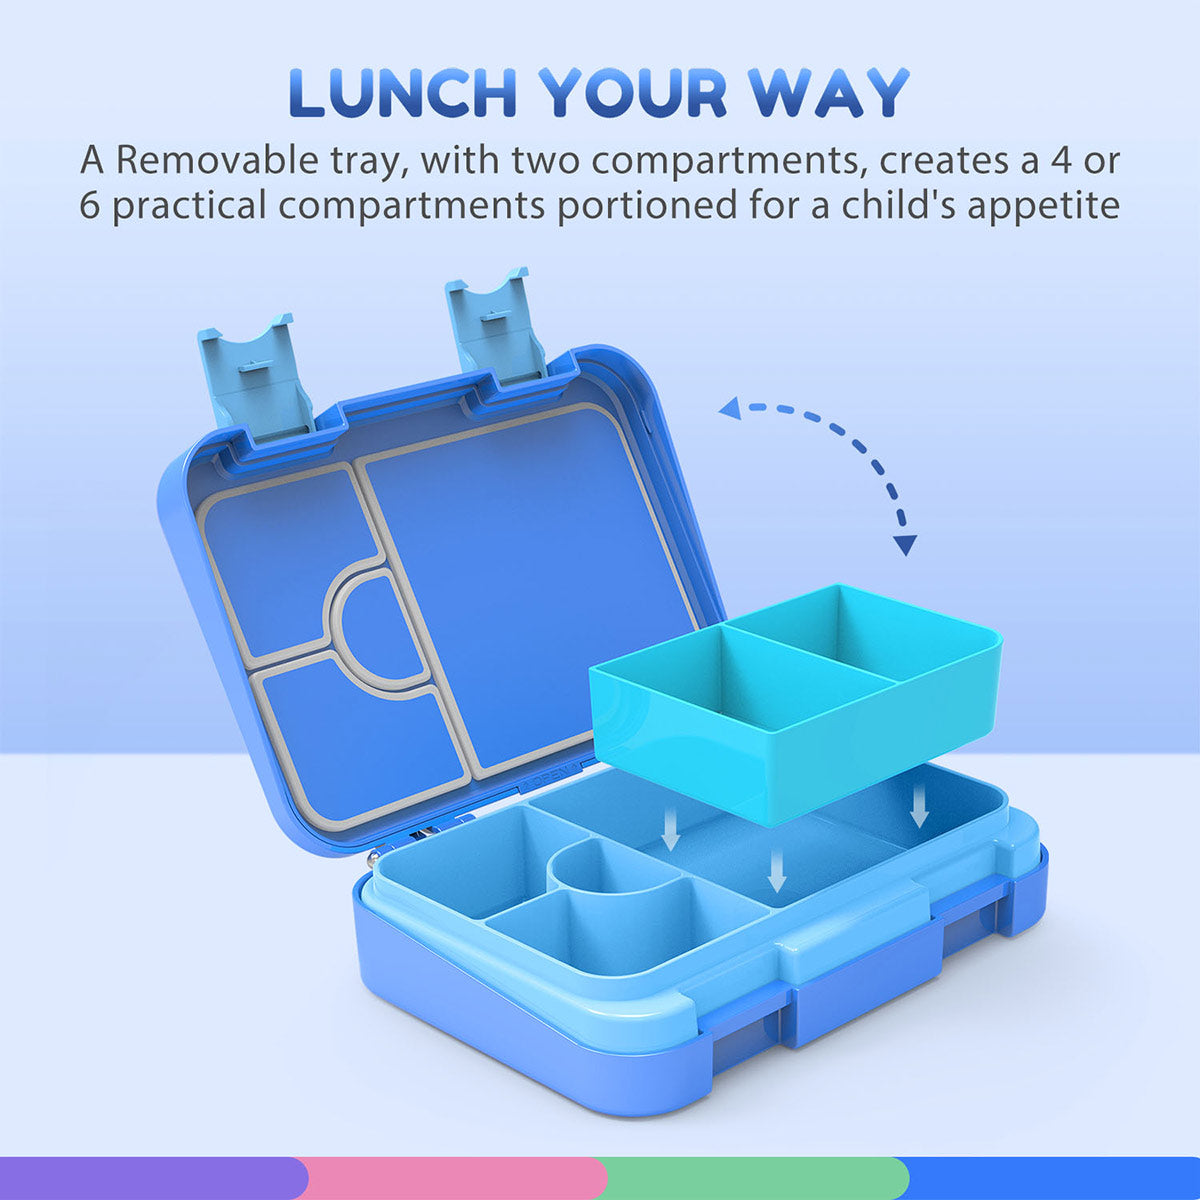  Caperci Versatile Kids Bento Lunch Box - Leakproof  6-Compartment Children's Lunch Container with Removable Compartment - Ideal  Portions for Ages 3 to 7, BPA-Free Materials (Green) : Home & Kitchen